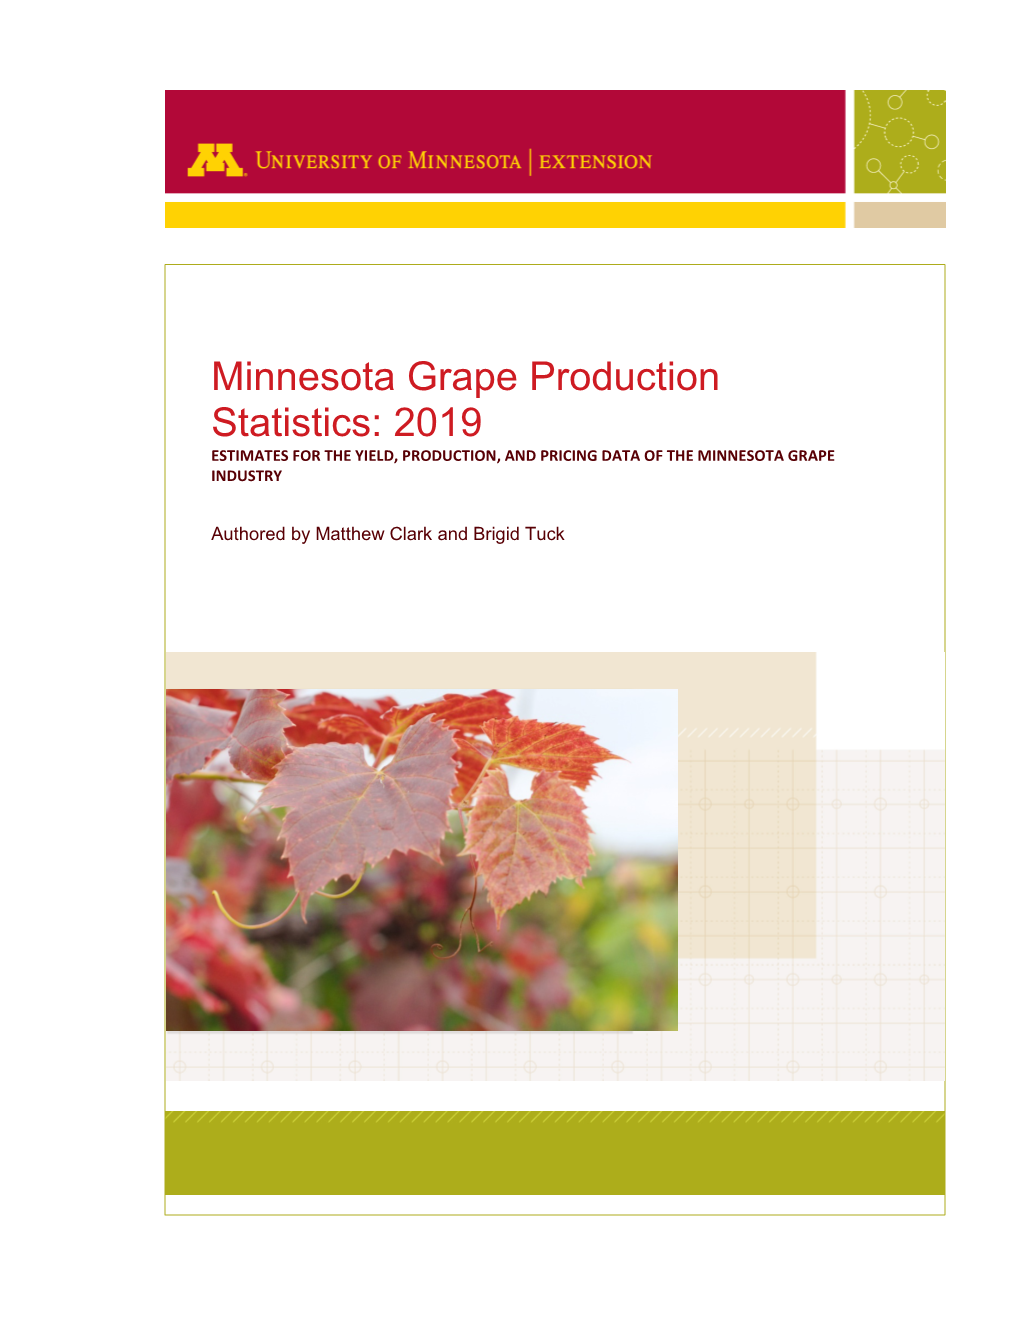 Minnesota Grape Production Statistics: 2019 ESTIMATES for the YIELD, PRODUCTION, and PRICING DATA of the MINNESOTA GRAPE INDUSTRY